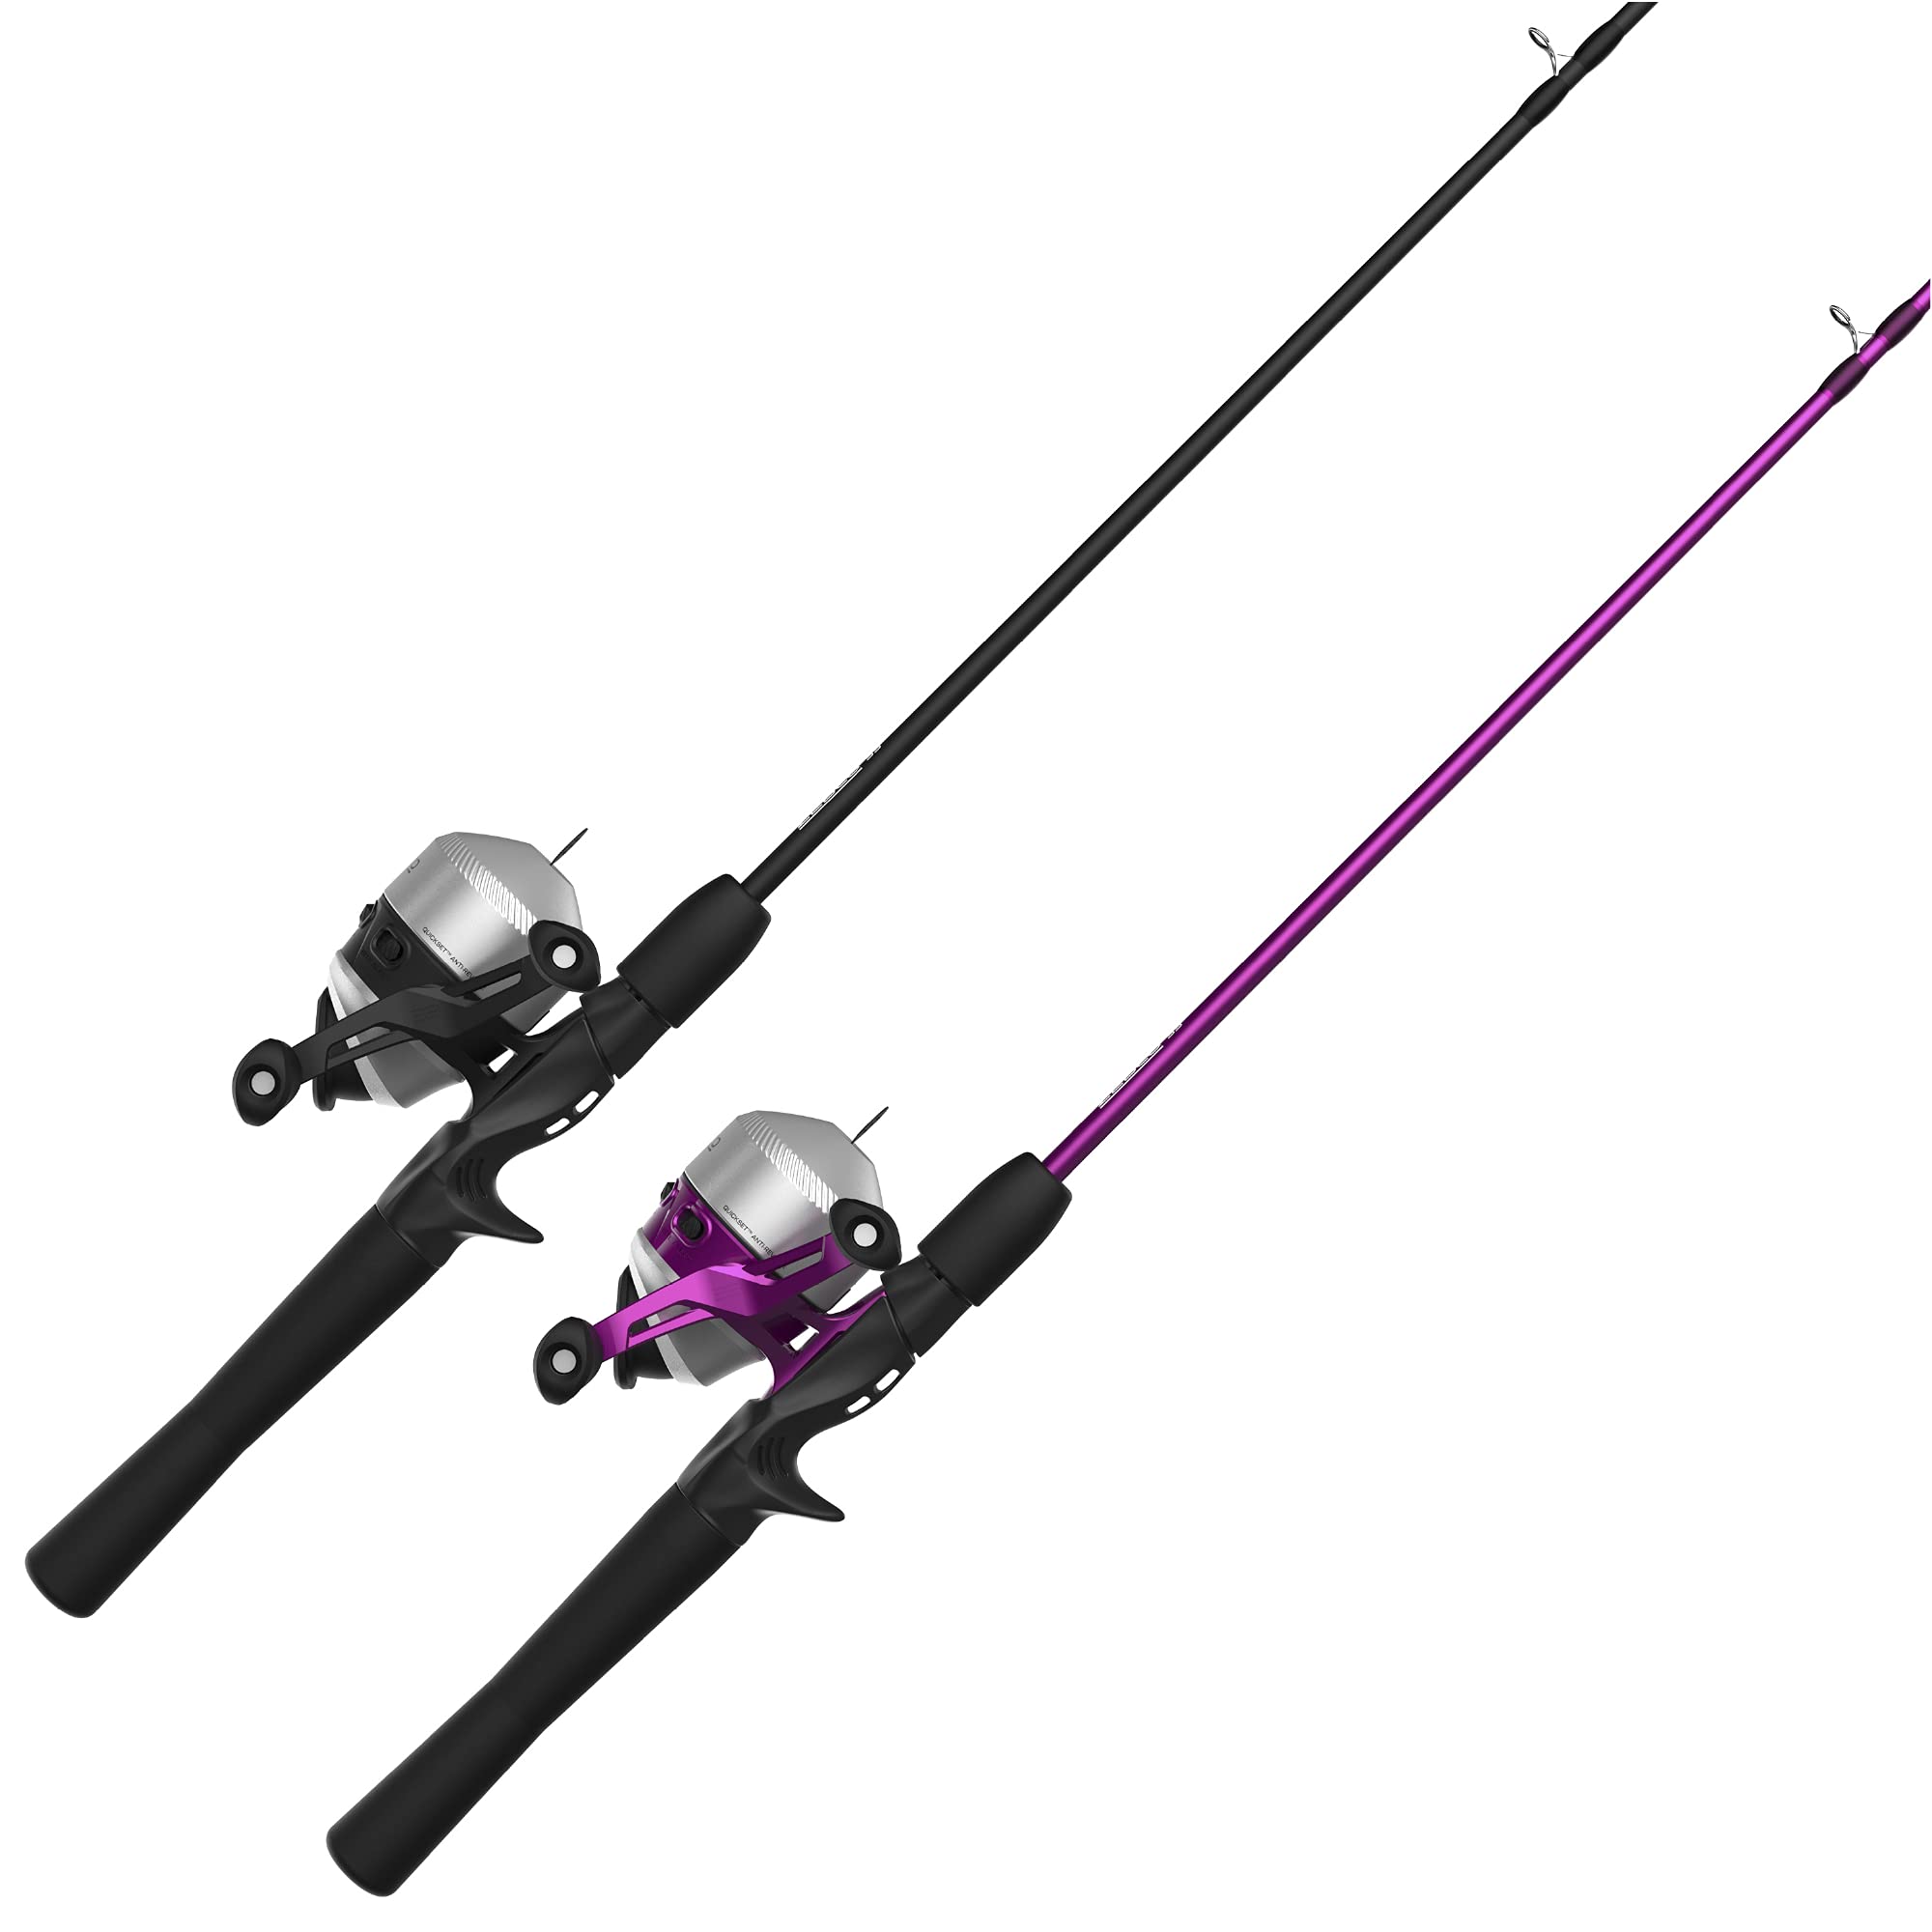 Two kids' fishing sets-Zebco rod with closed reel +Shakespeare rod